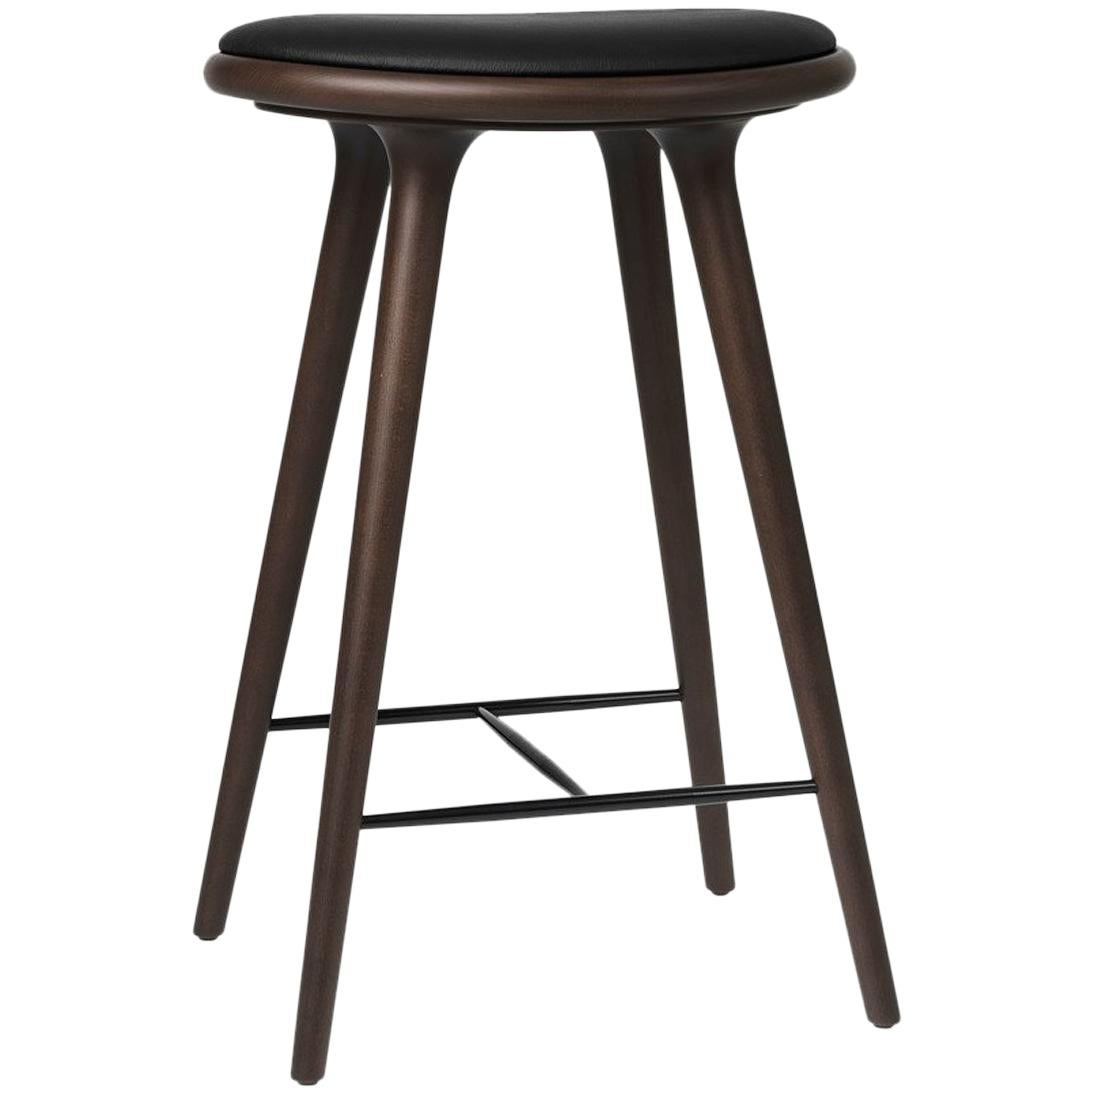 Counter Height High Stool Dark Stained Beech Wood Leather Seat by Mater Design